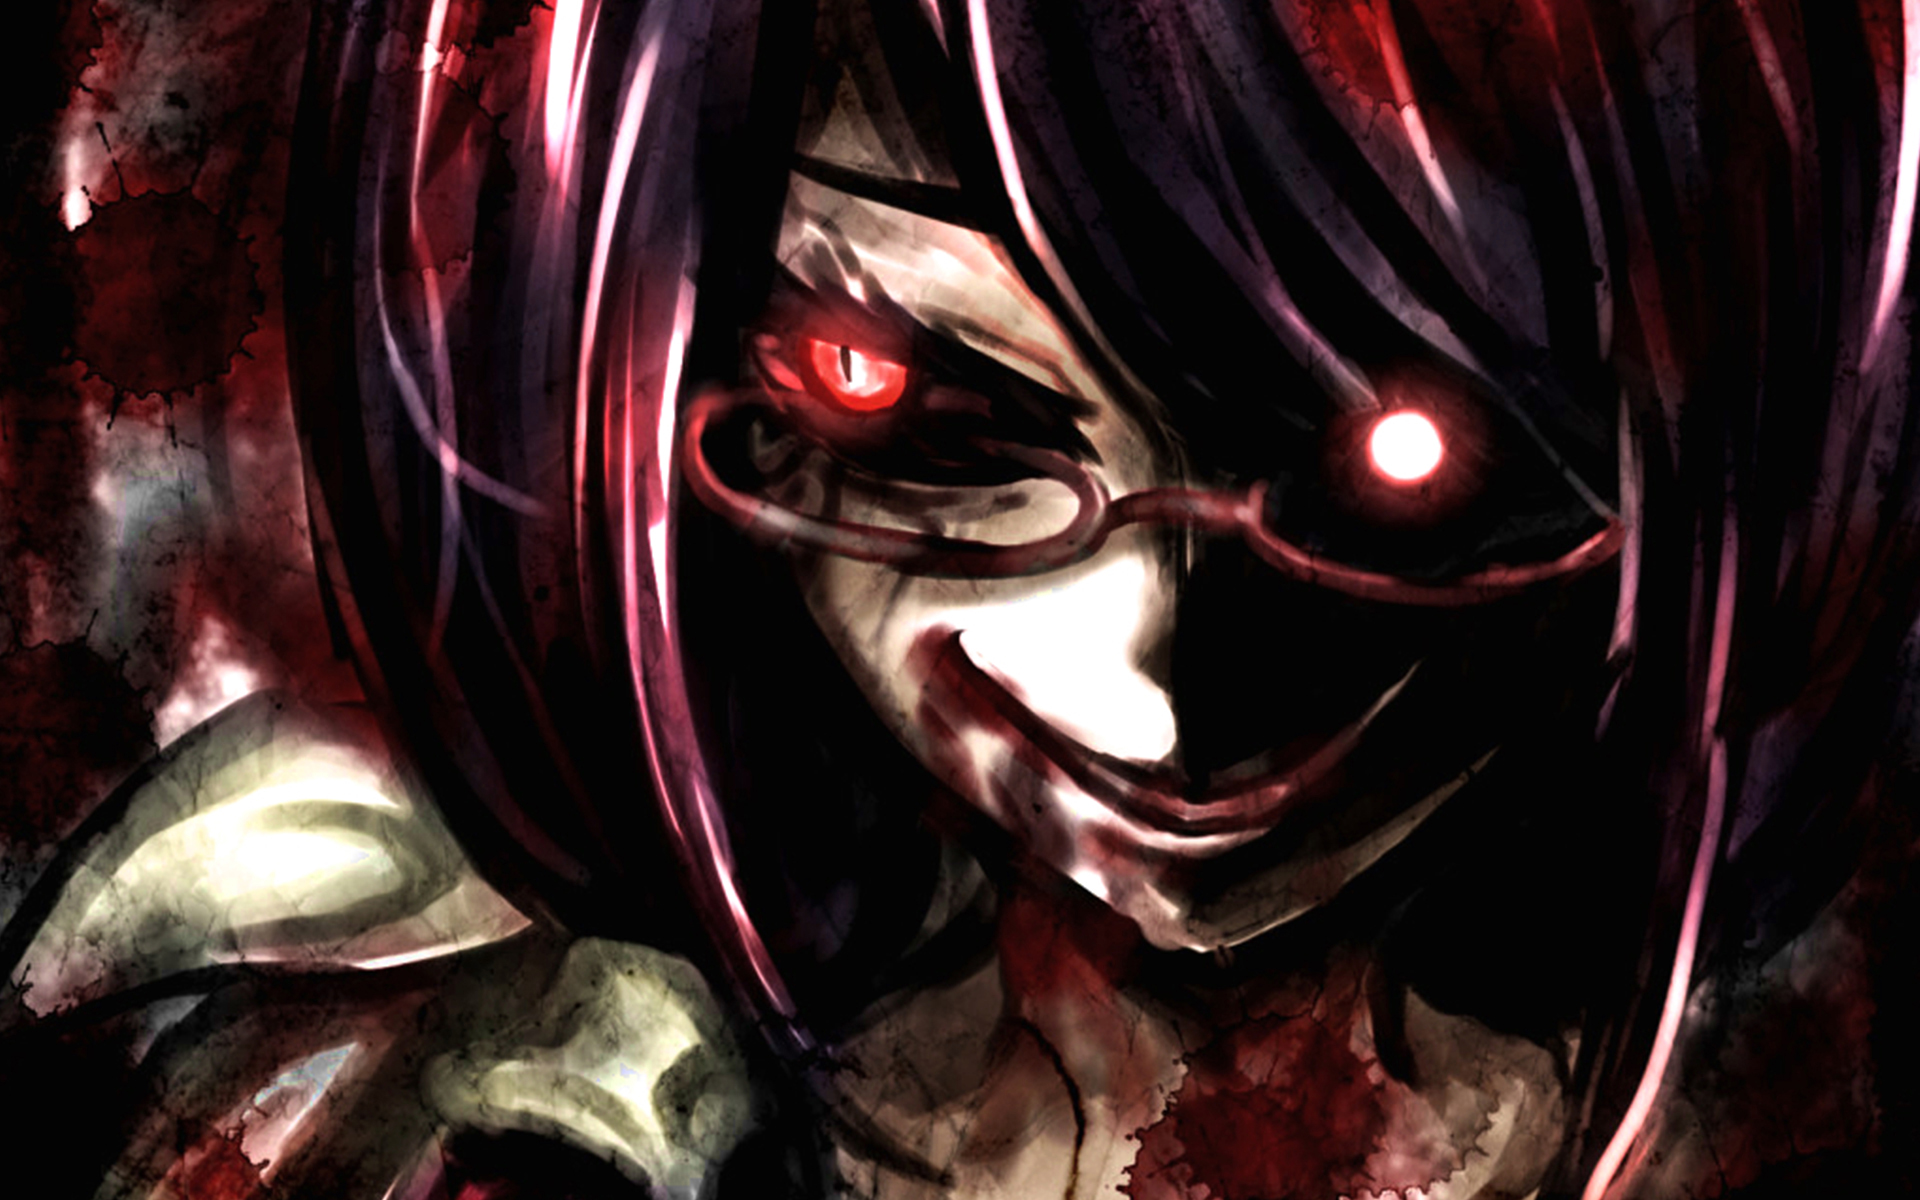 Tokyo Ghoul Rize Manga And